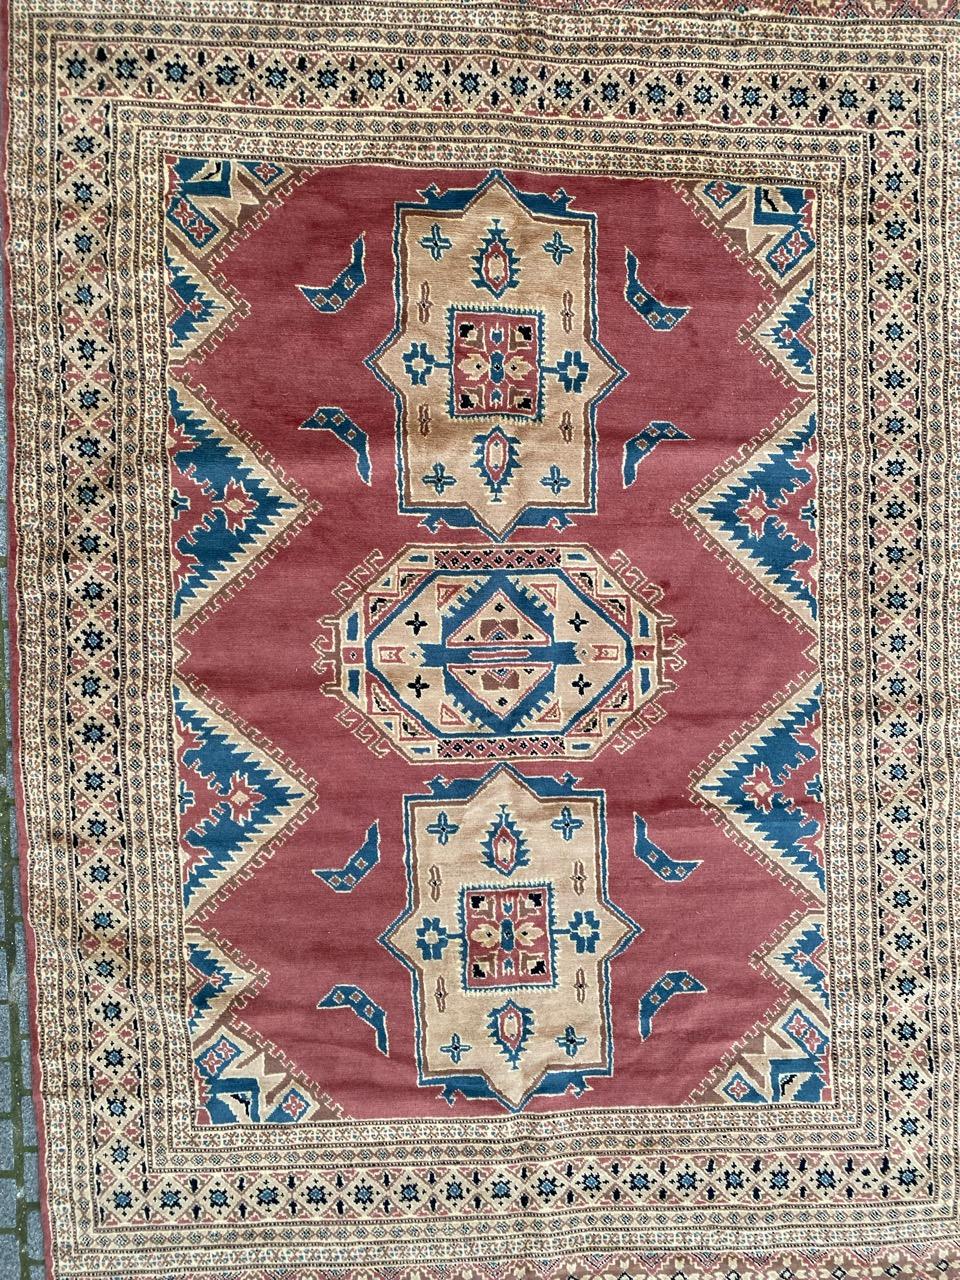 Nice mid century rug with beautiful geometrical design and nice colors, entirely hand knotted with wool velvet on cotton foundation.

✨✨✨
